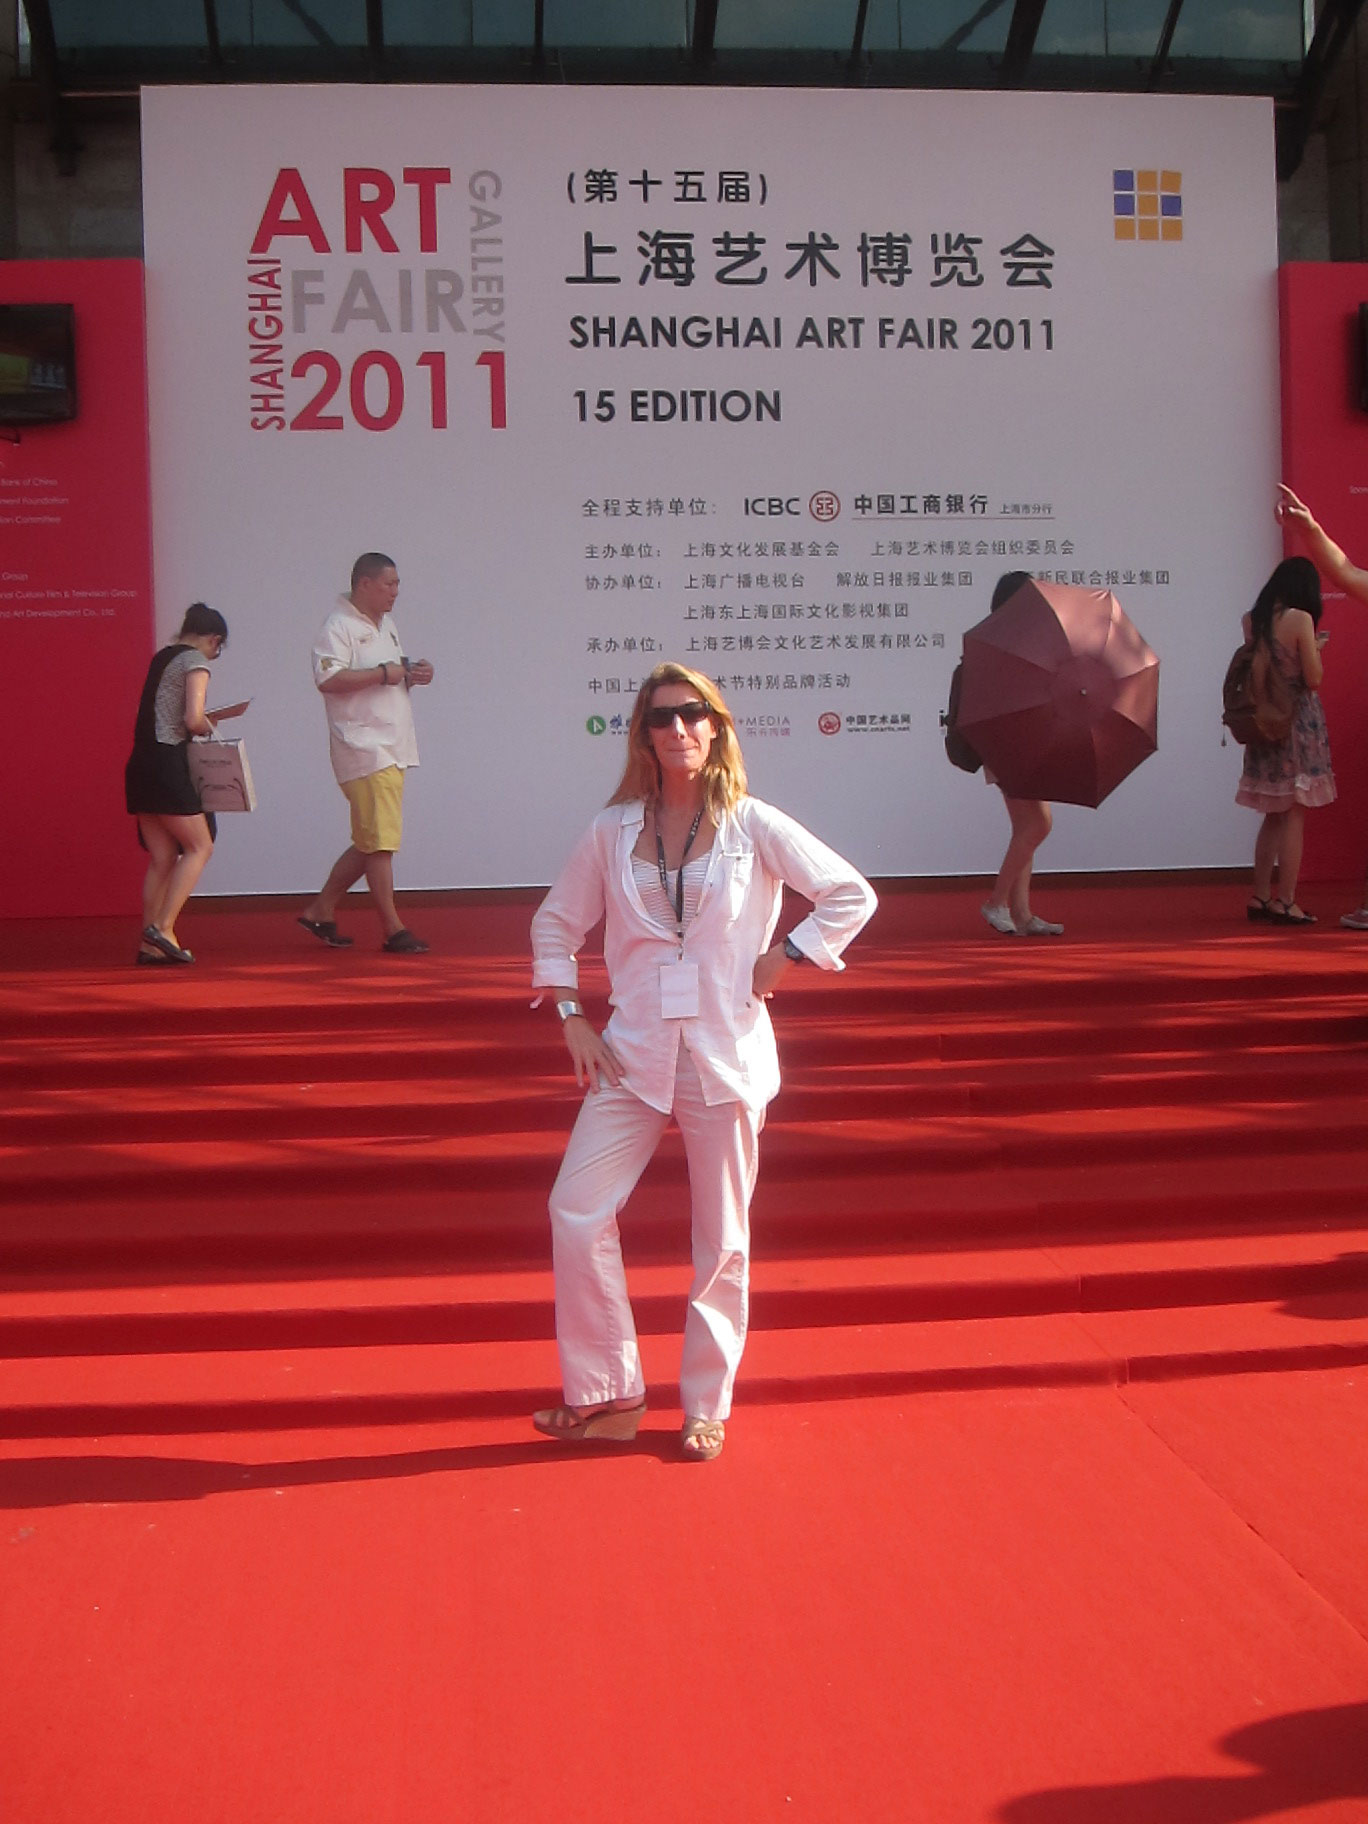 French sculptor Val - Valérie Goutard - with Philippe Staib Gallery at Shanghai Art Fair with Sculptureval